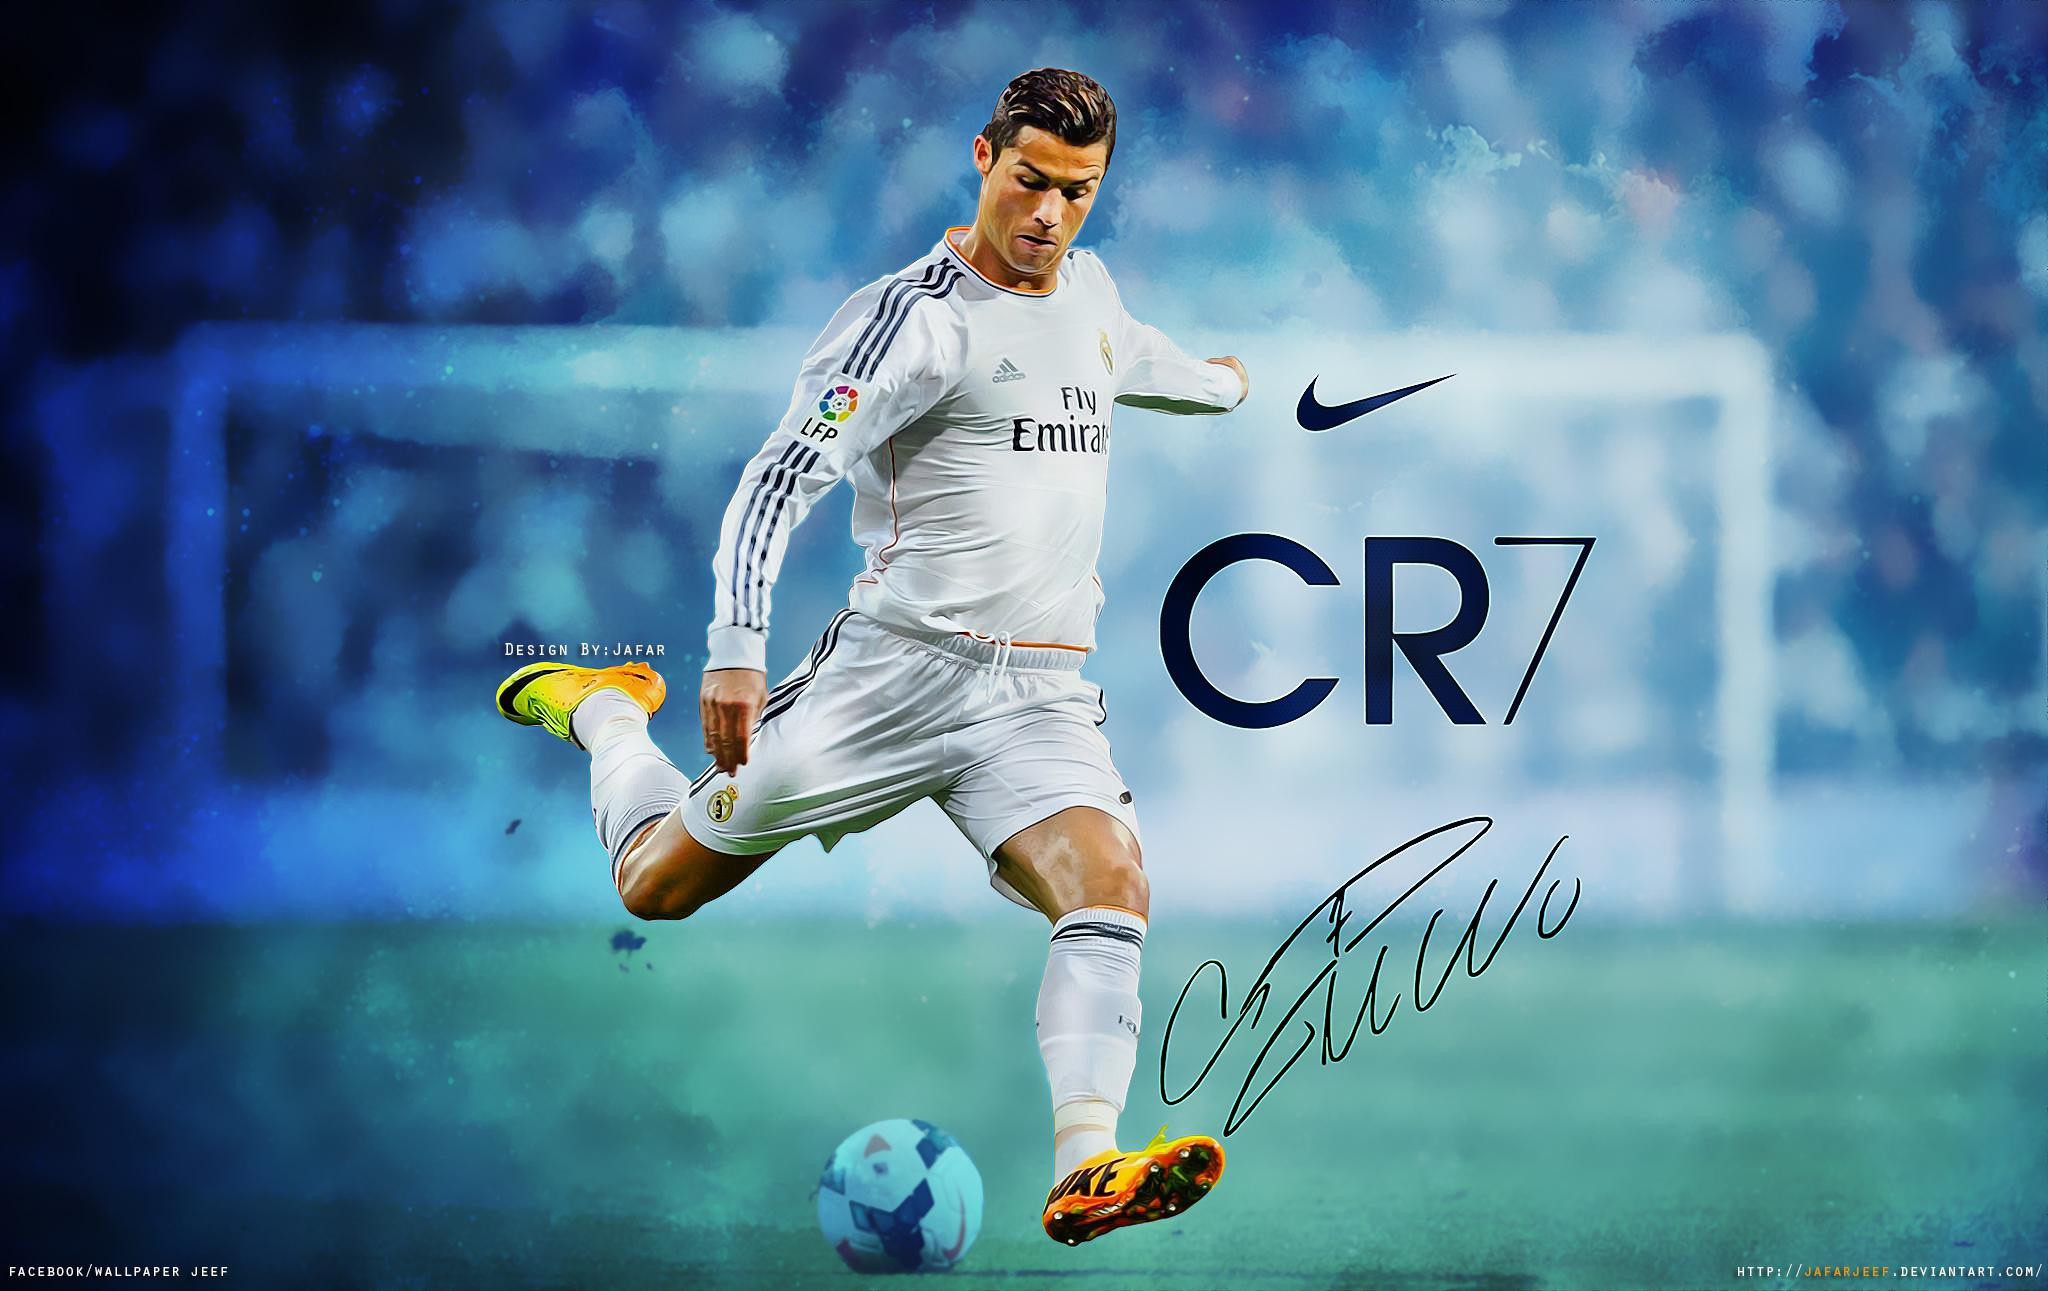 SIGNOOGLE Christiano Ronaldo Portugal Real Madrid Juventus Wall Posters  Wallpaper Design Image With Quotes For Sports Club Living Boys Room Bedroom  Wall 18 x 10 Inch  Amazonin Home  Kitchen